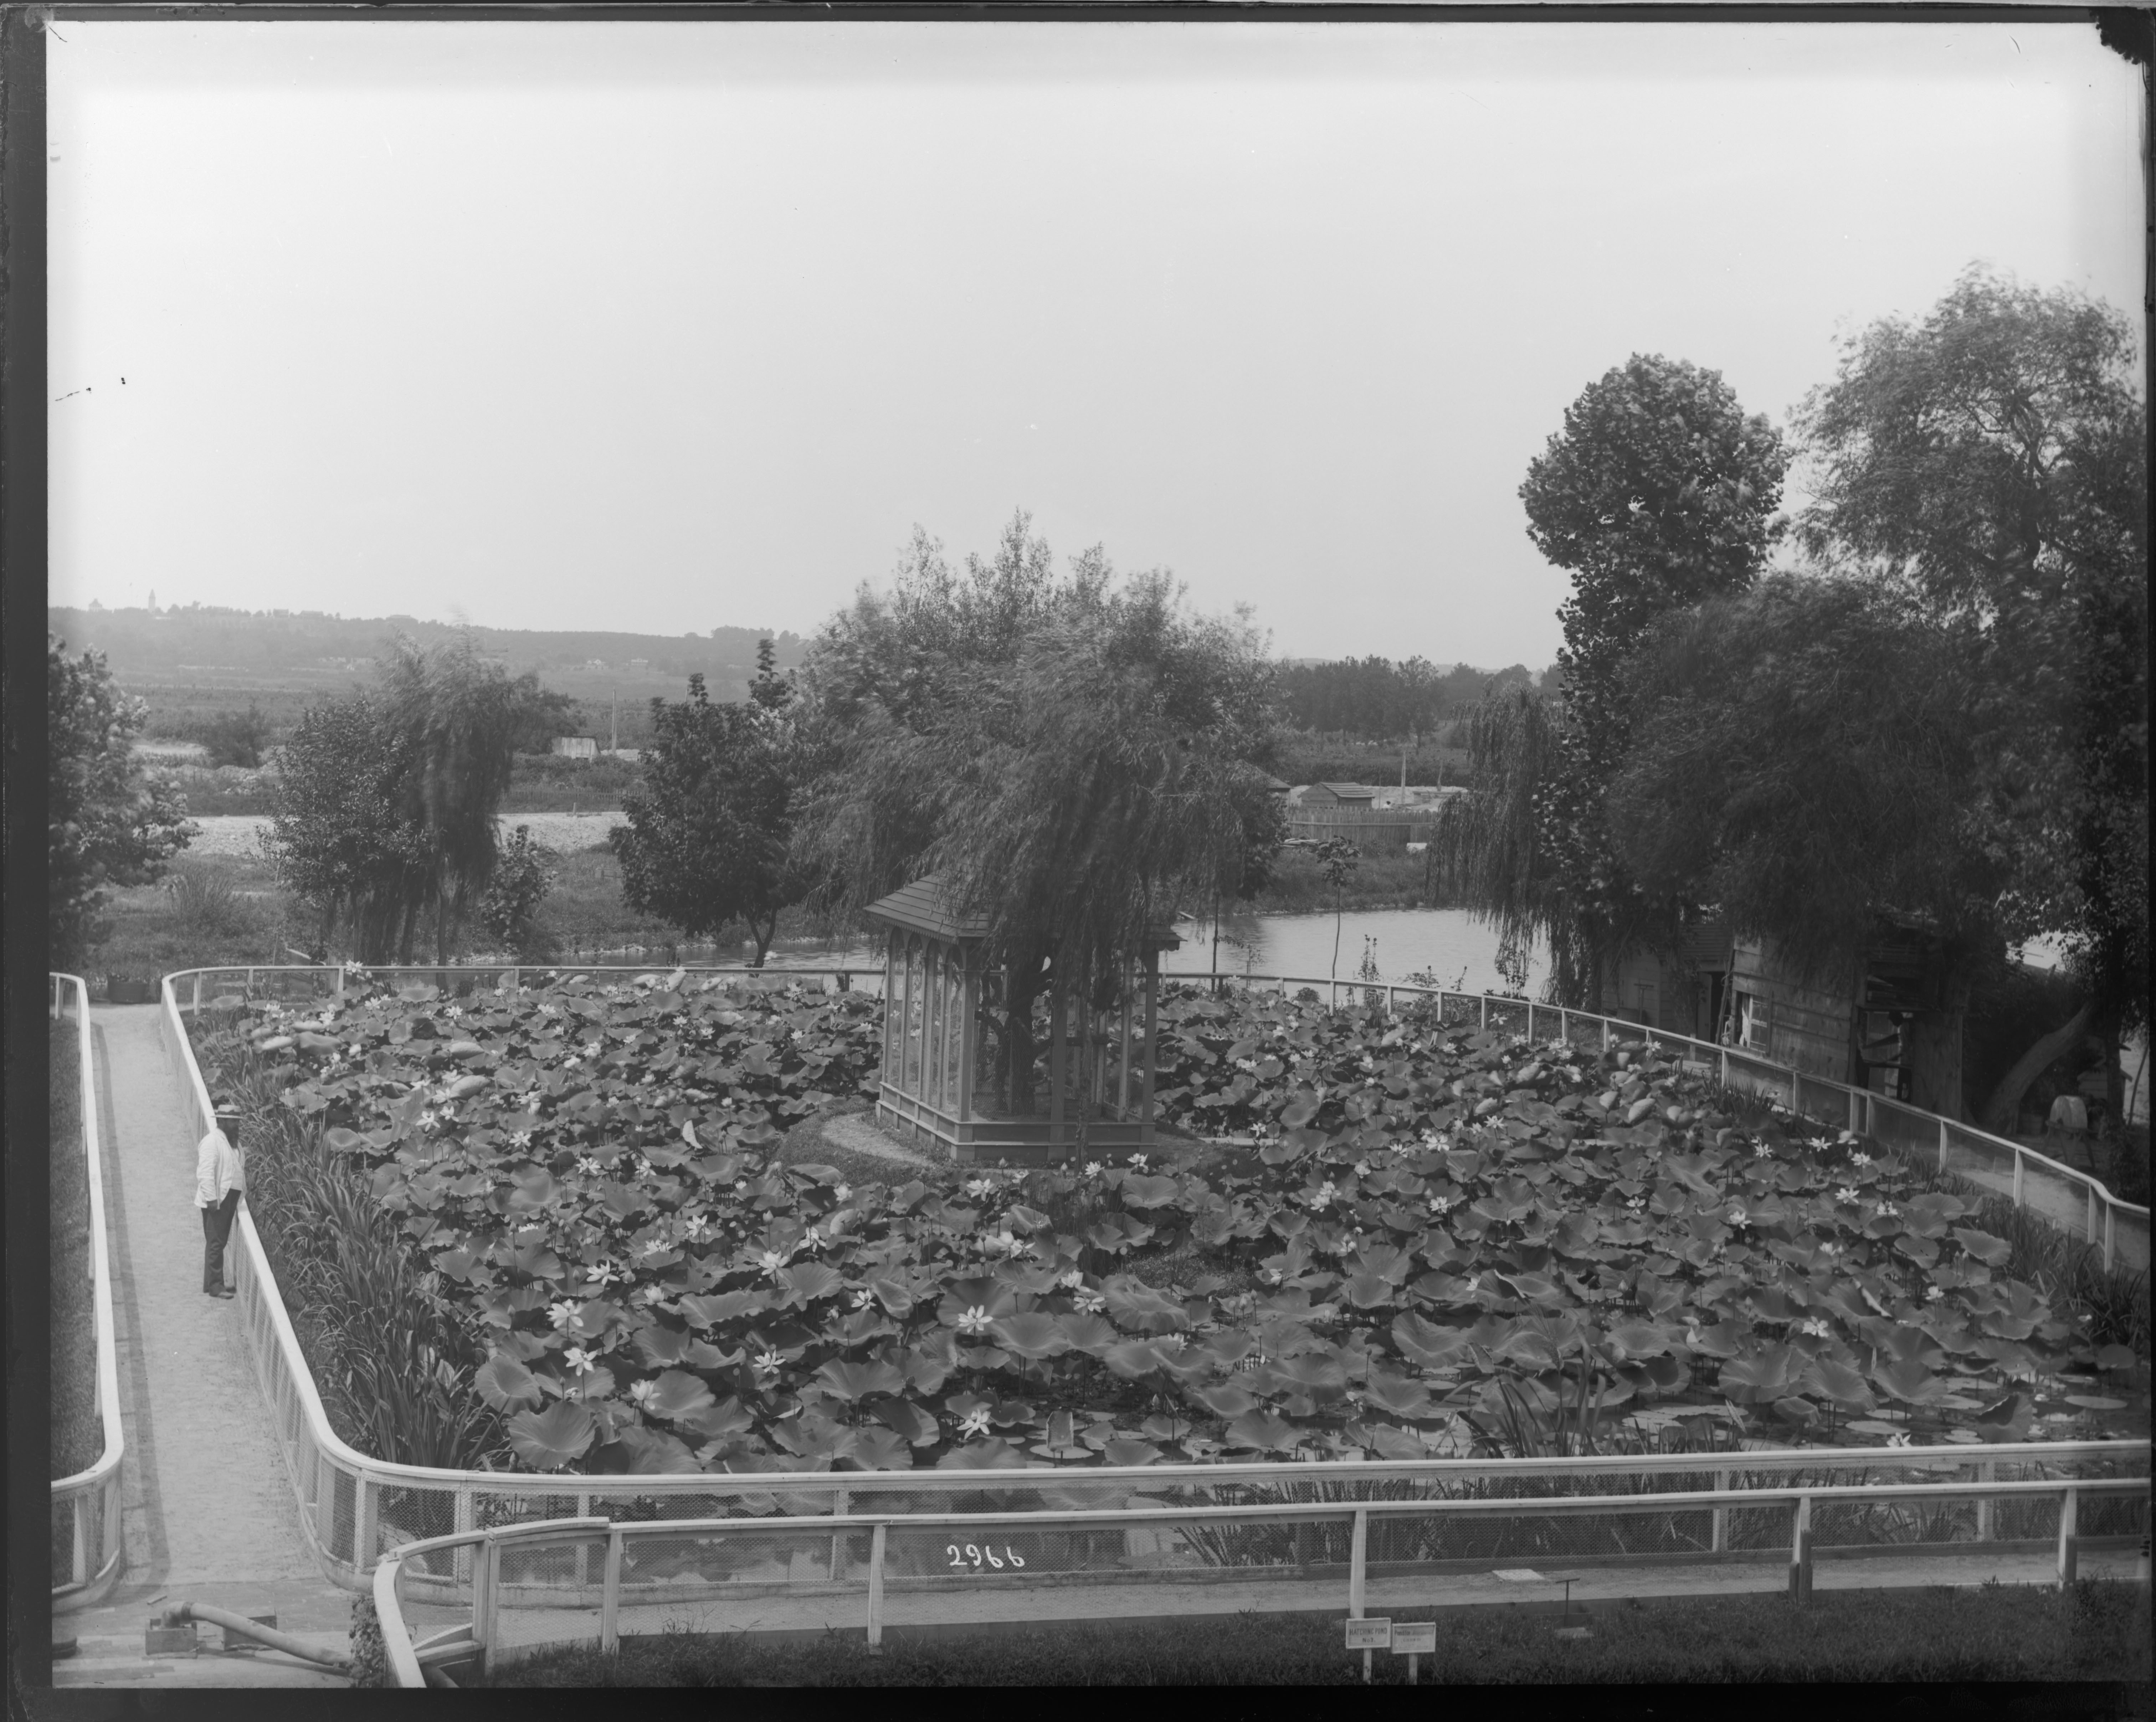 U.S. Fish Commission fish hatchery ponds for the production of carp, golden ide, and tench, located 